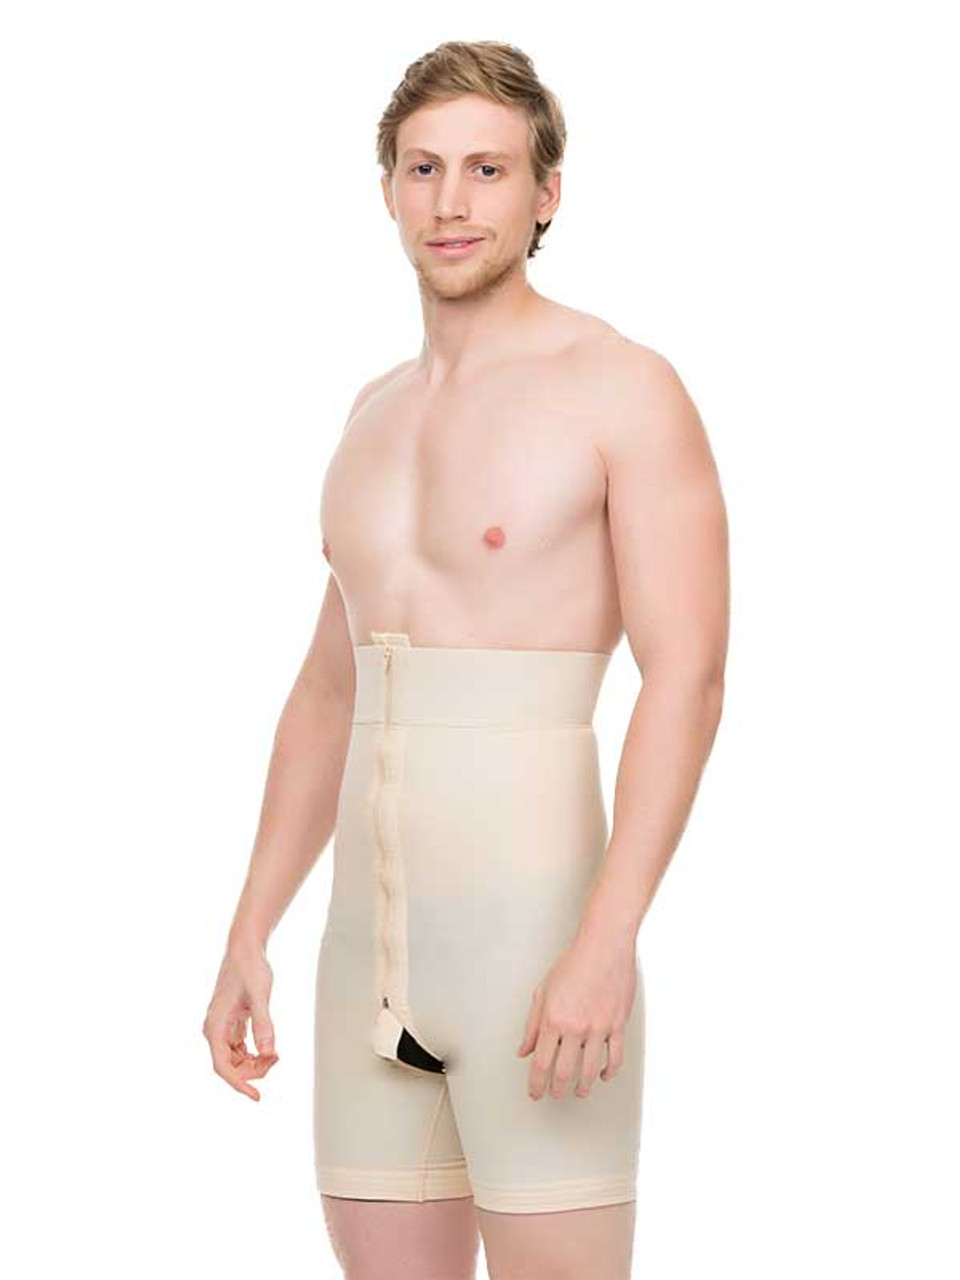 Isavela Stage 1 Low Waisted Abdominal Girdle - Mid-Thigh